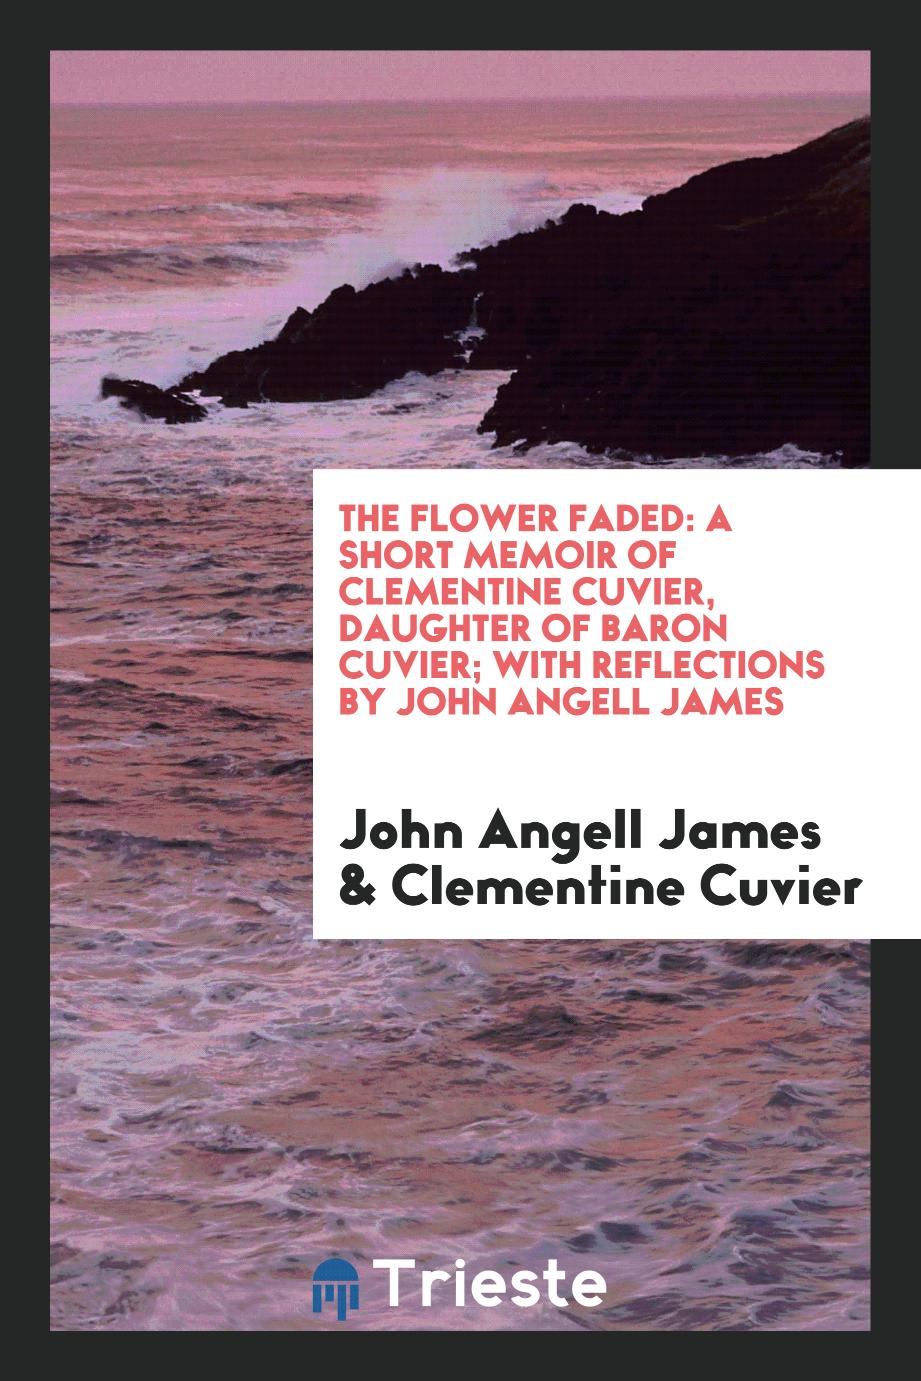 The Flower Faded: A Short Memoir of Clementine Cuvier, Daughter of Baron Cuvier; With Reflections by John Angell James